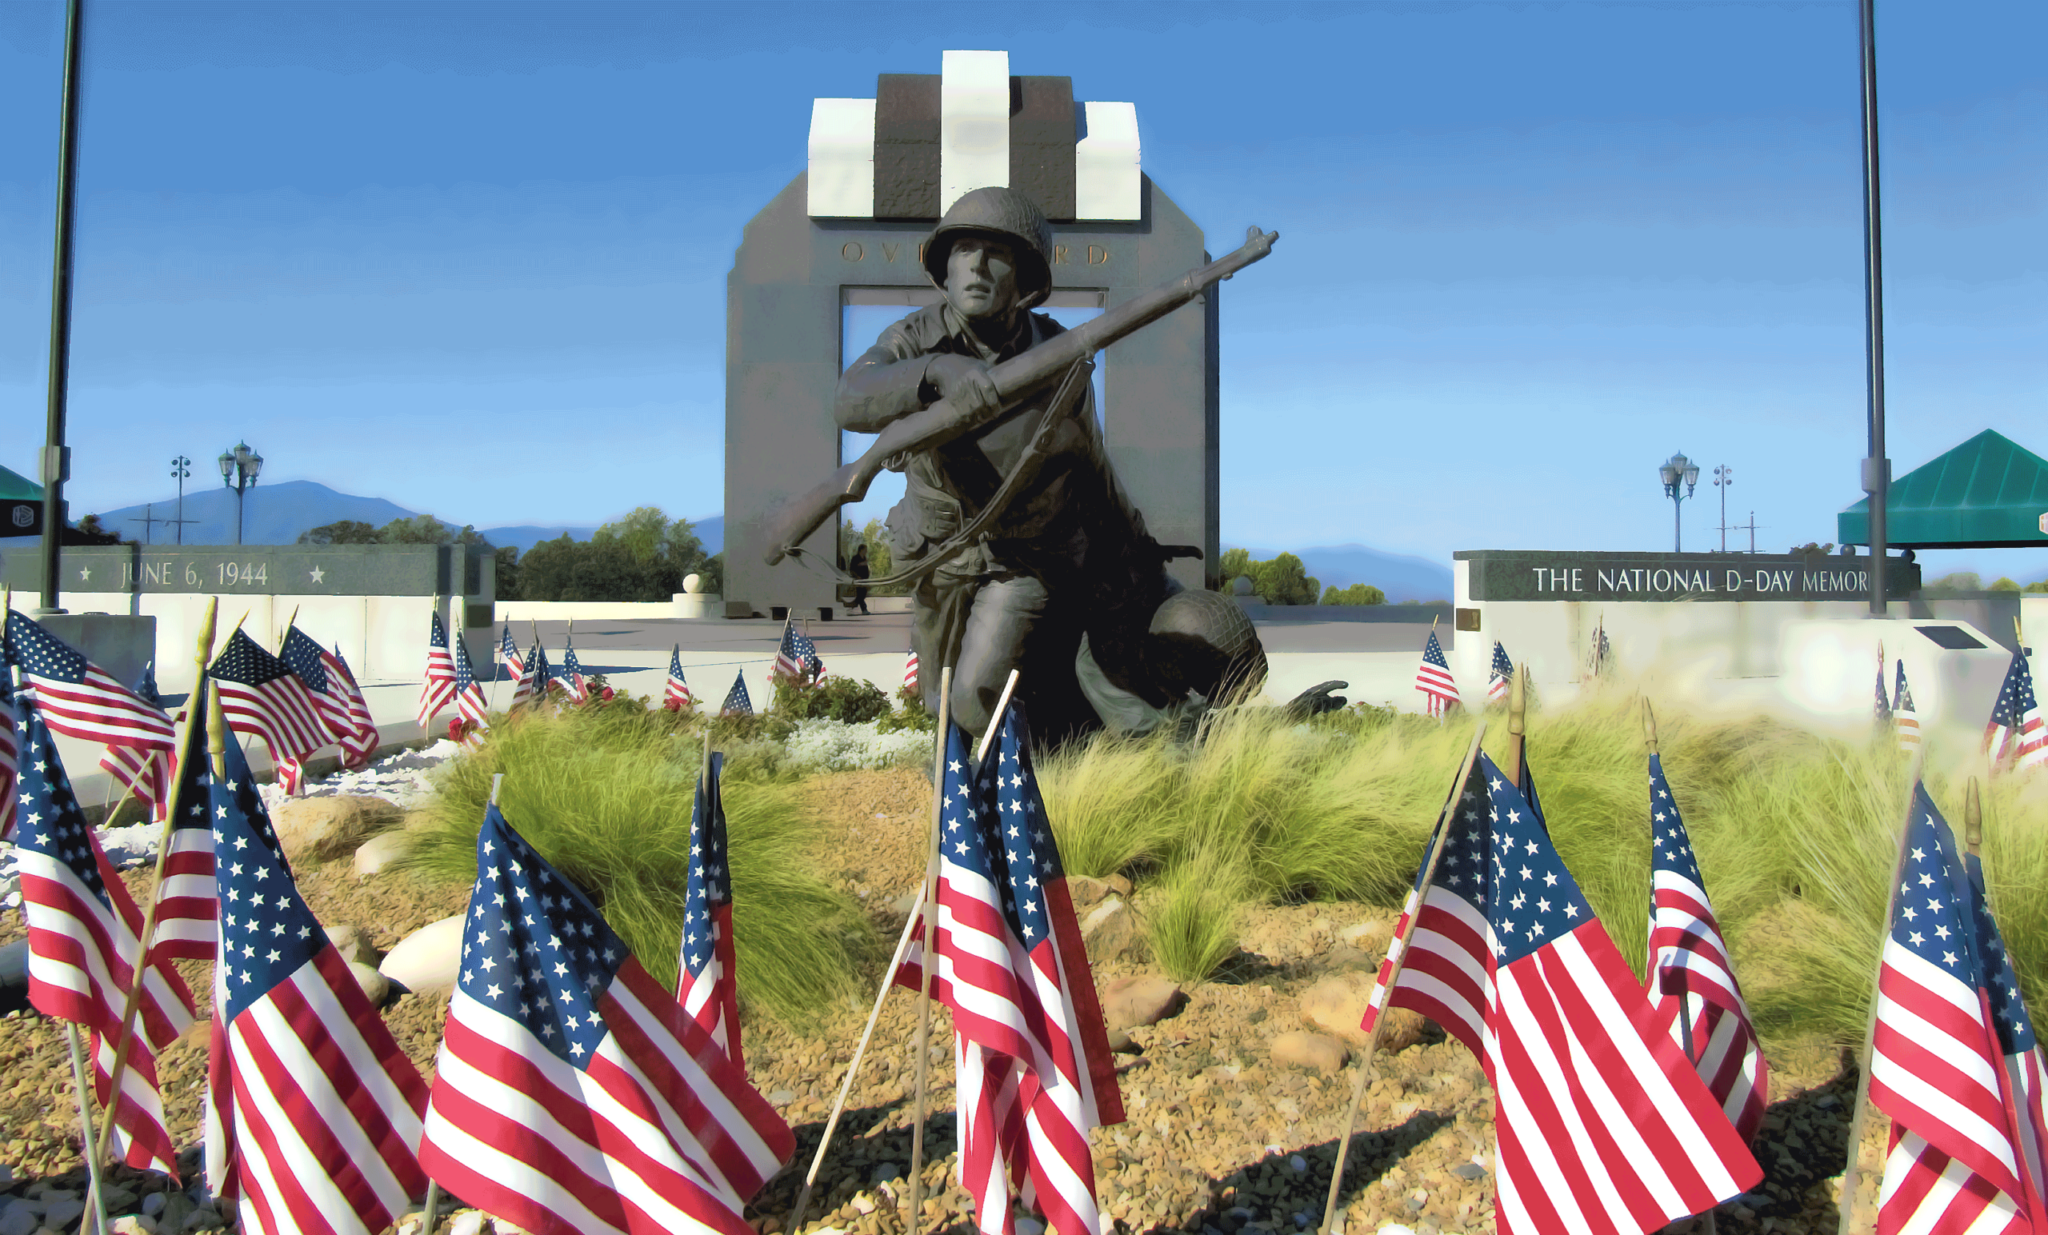 National D-Day Memorial. Photograph by Ian Patrick/Alamy.